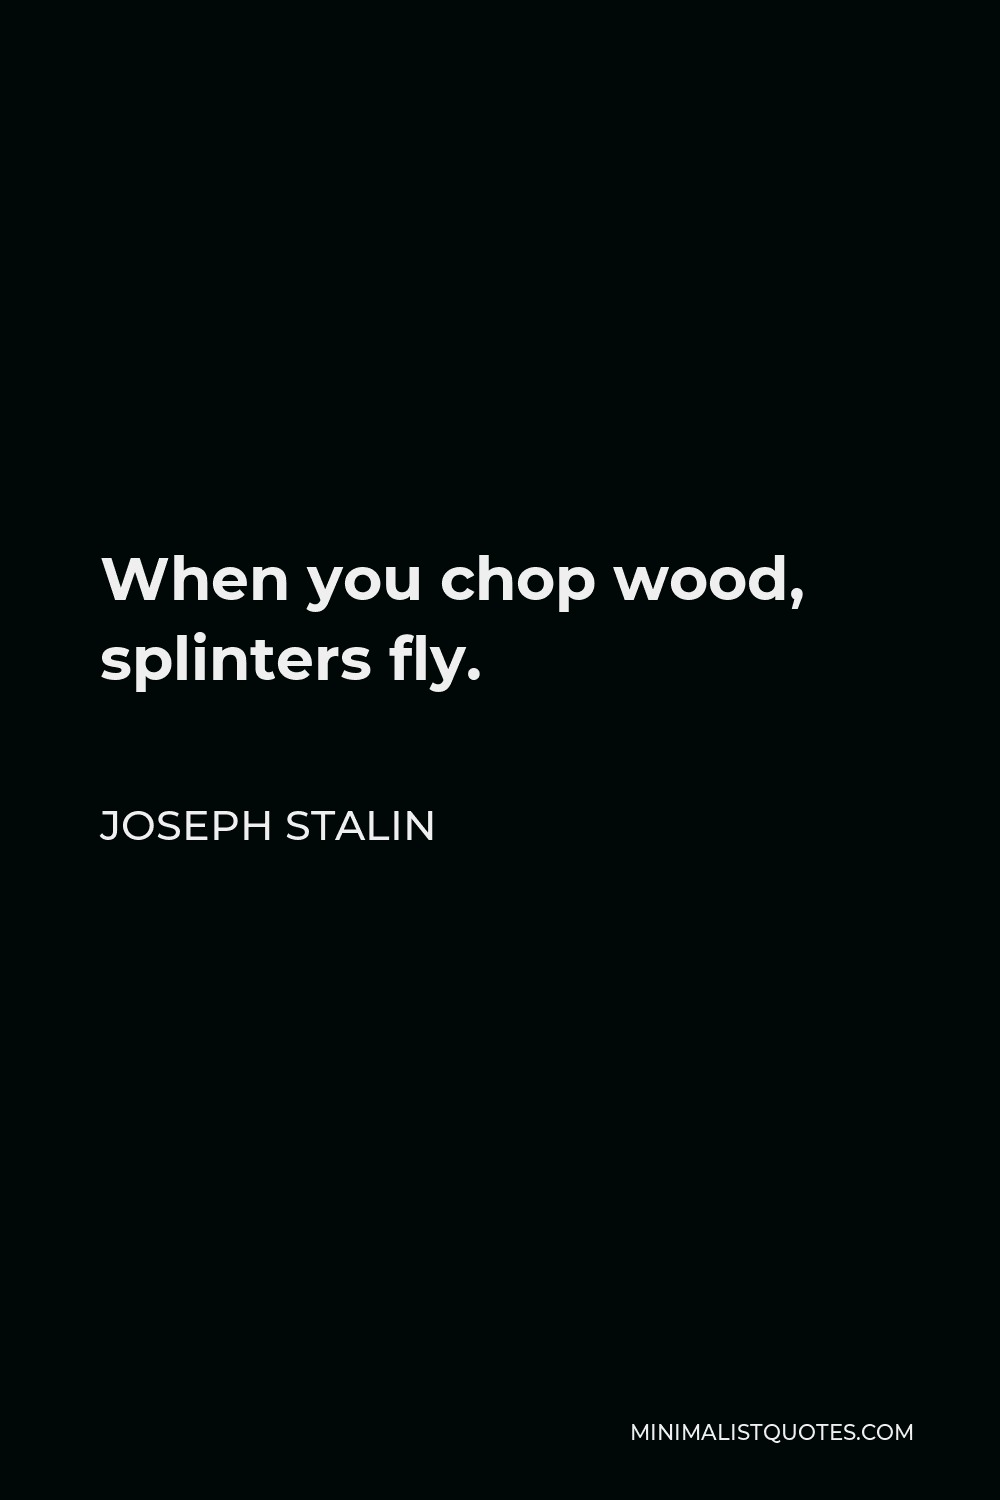 Joseph Stalin Quote - When you chop wood, splinters fly.